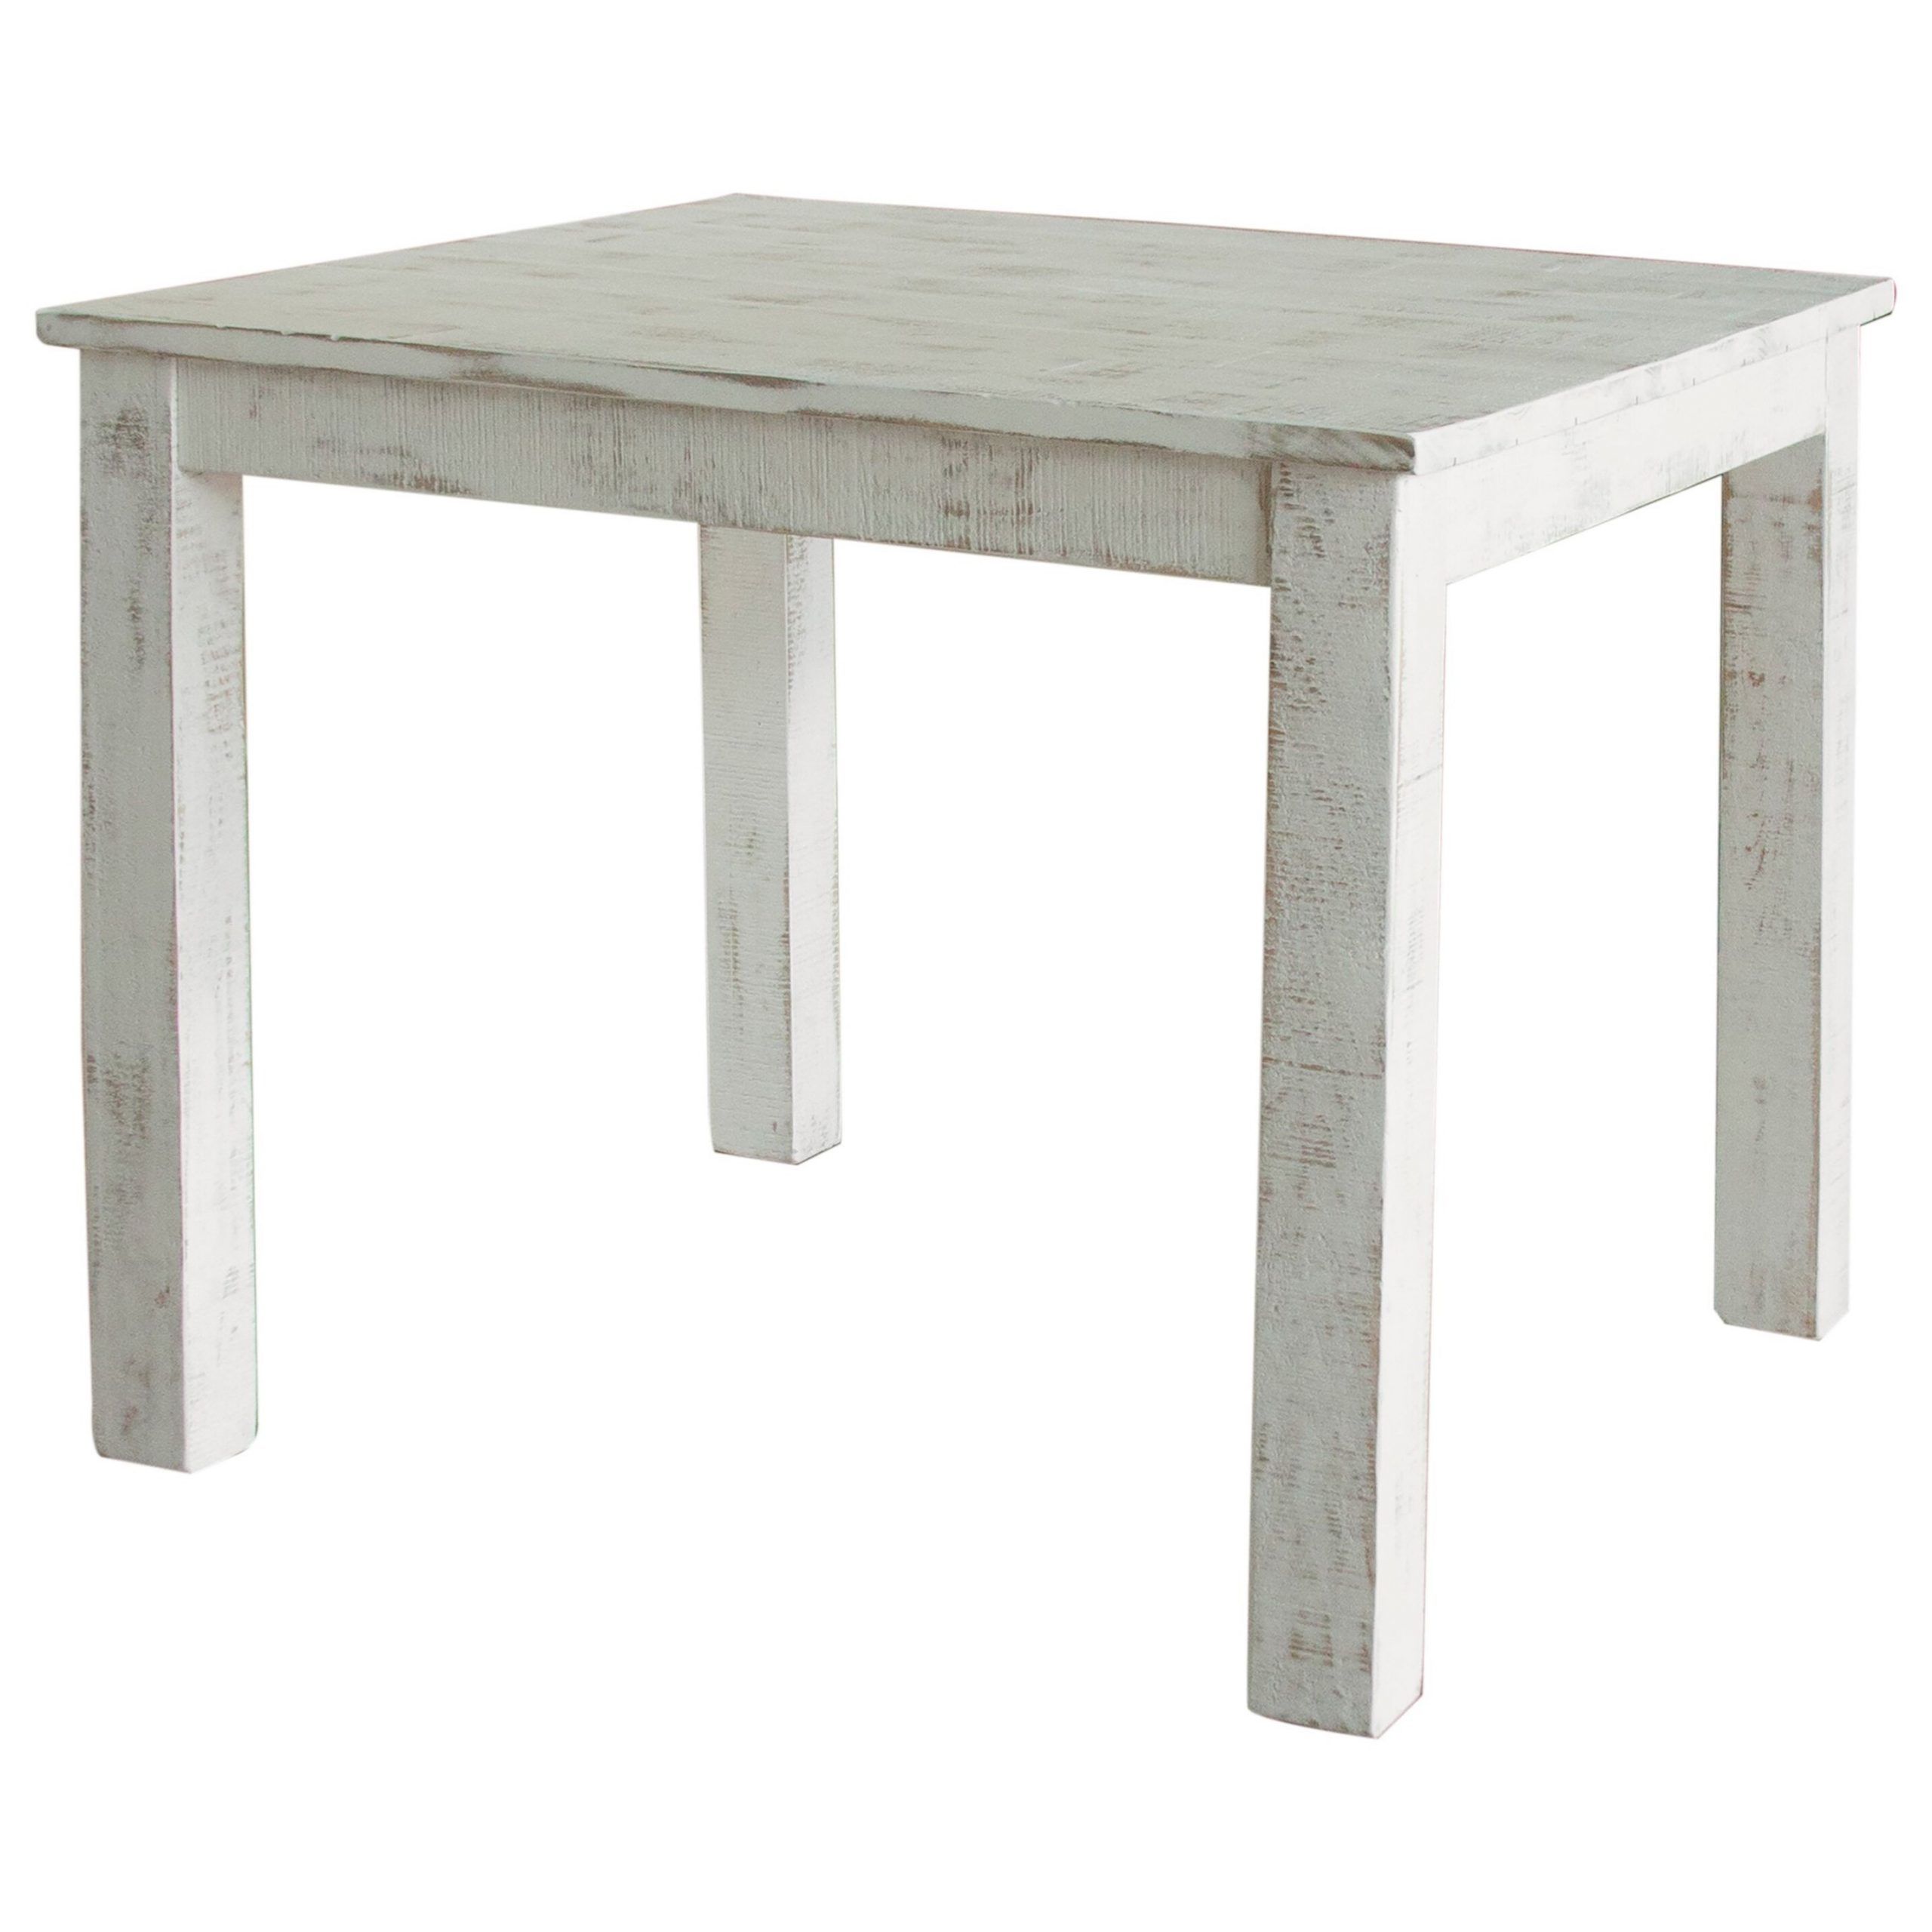 International Furniture Direct Pueblo Rustic 42" Counter Within 2019 Distressed Grey Finish Wood Classic Design Dining Tables (View 9 of 25)